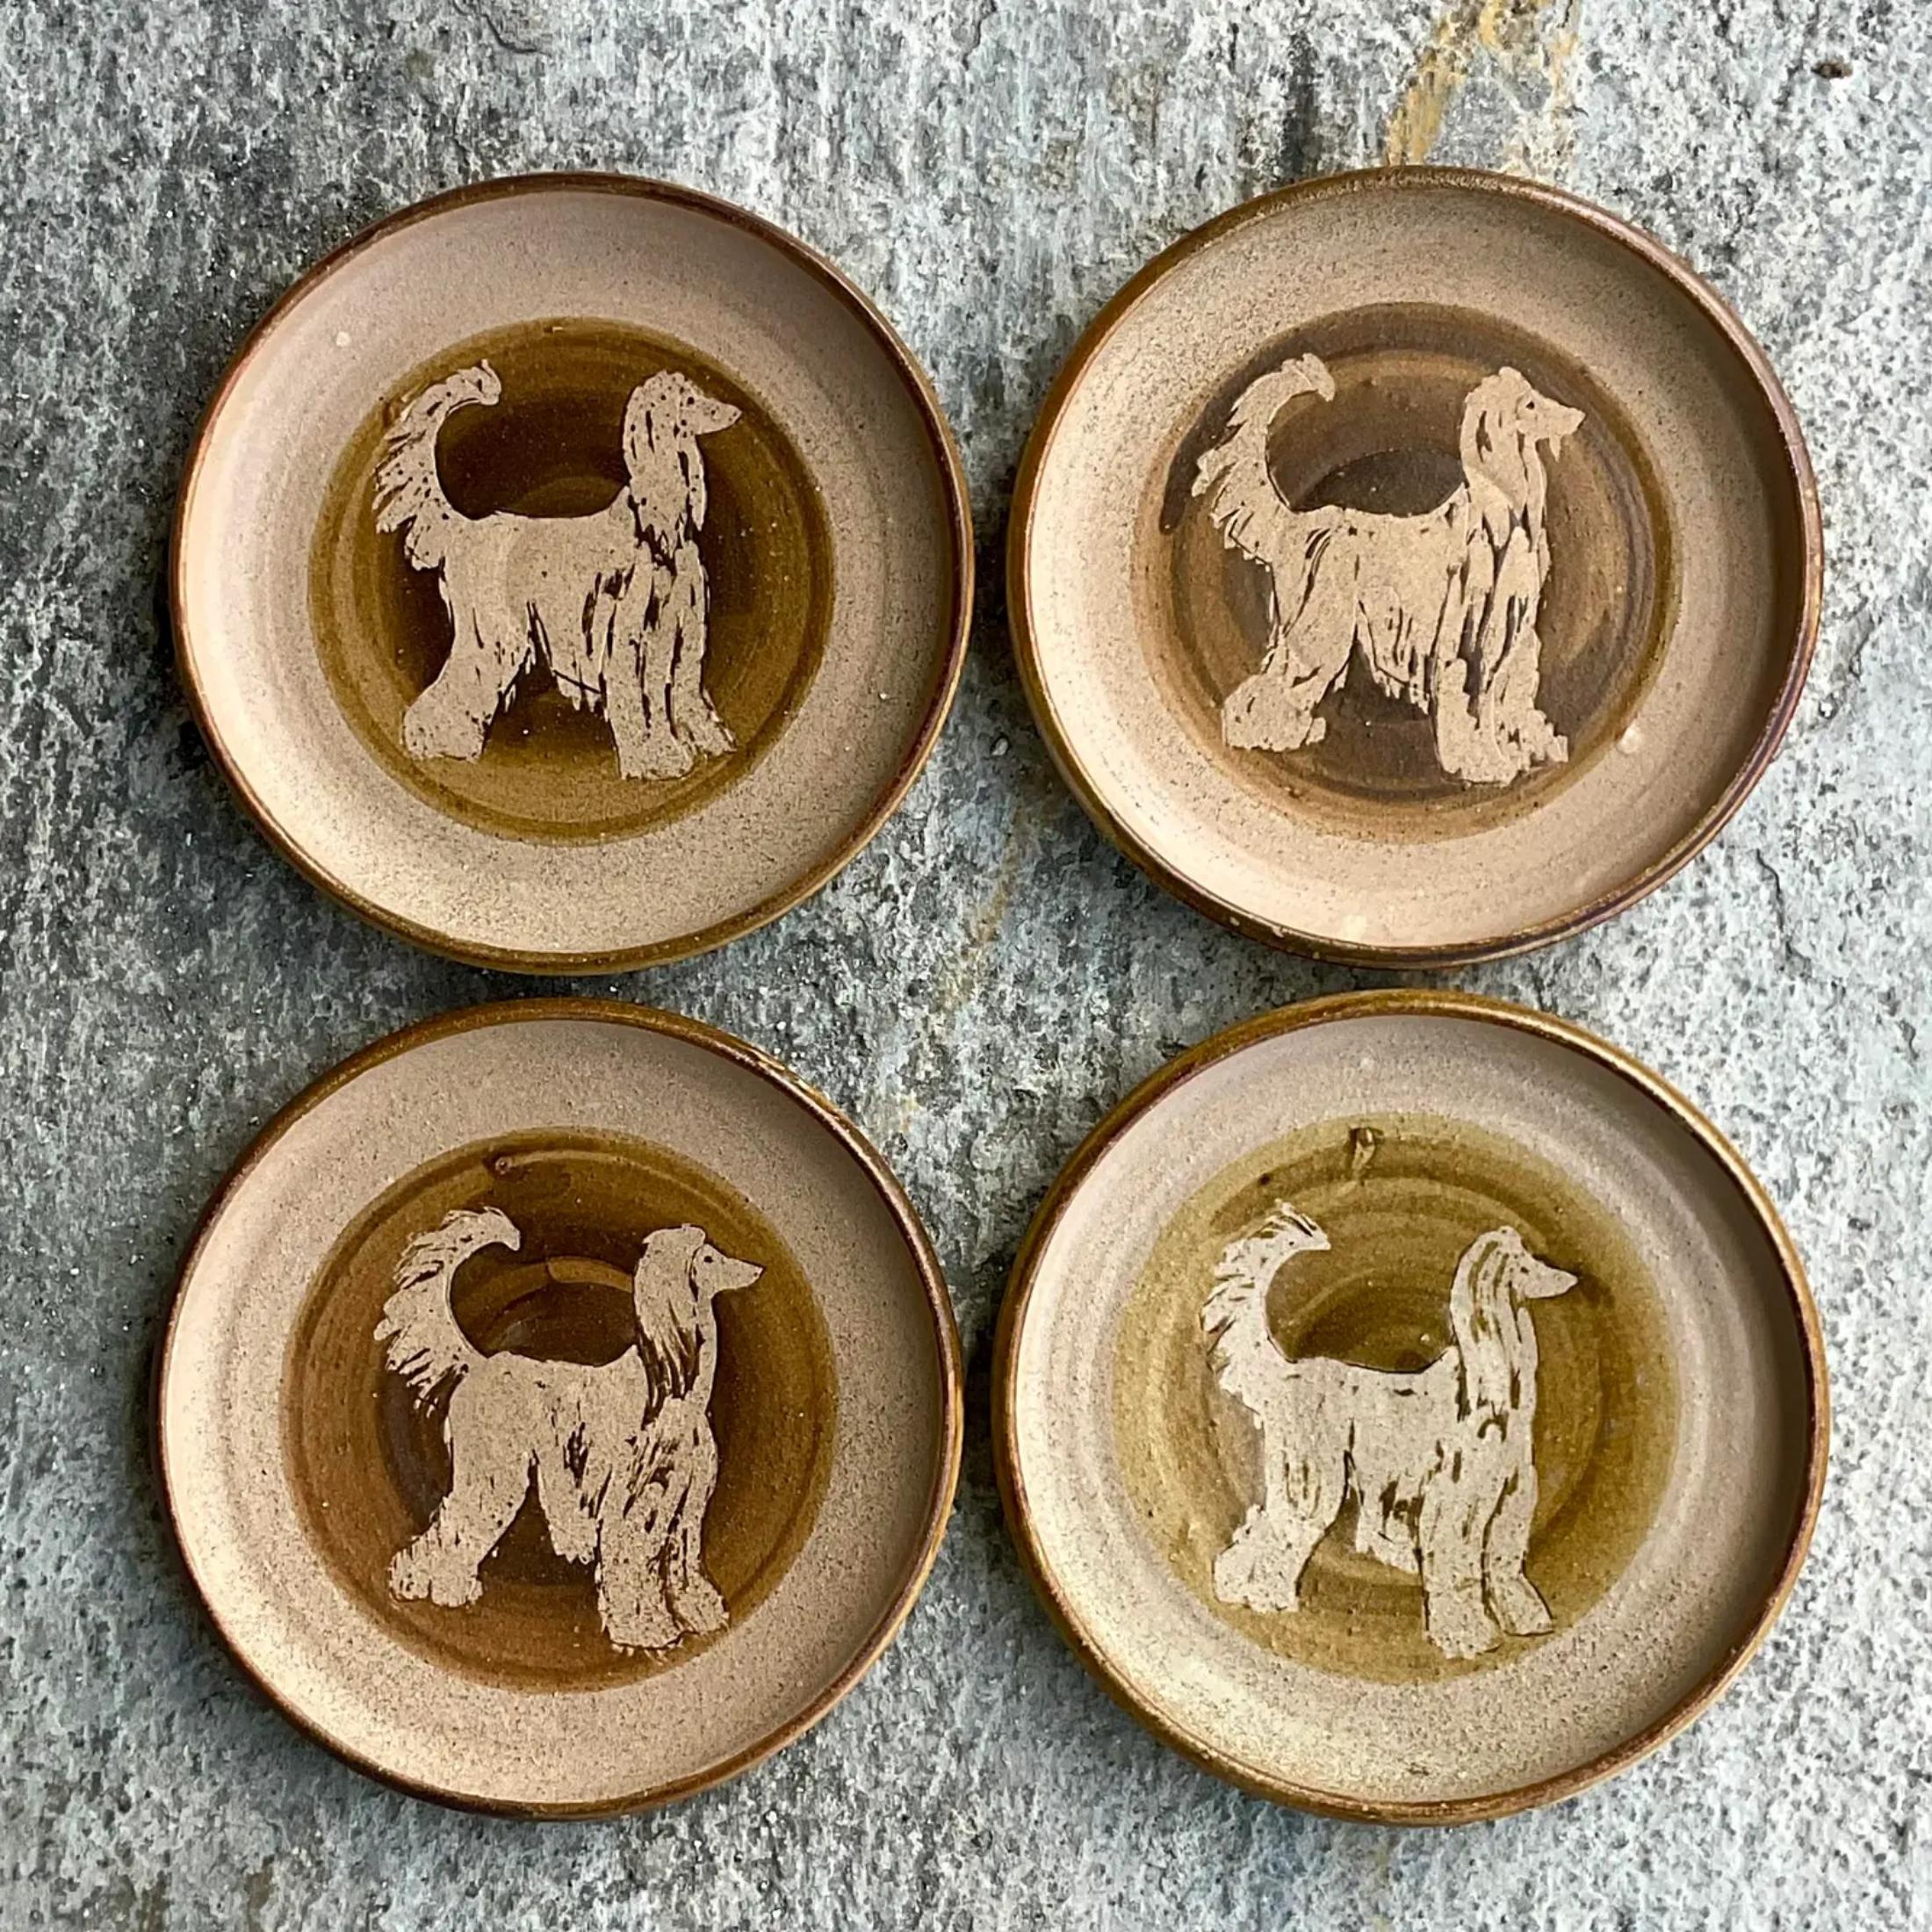 Vintage Boho Signed Studio Pottery Plates With Afghan Dogs - Set of 4 For Sale 1